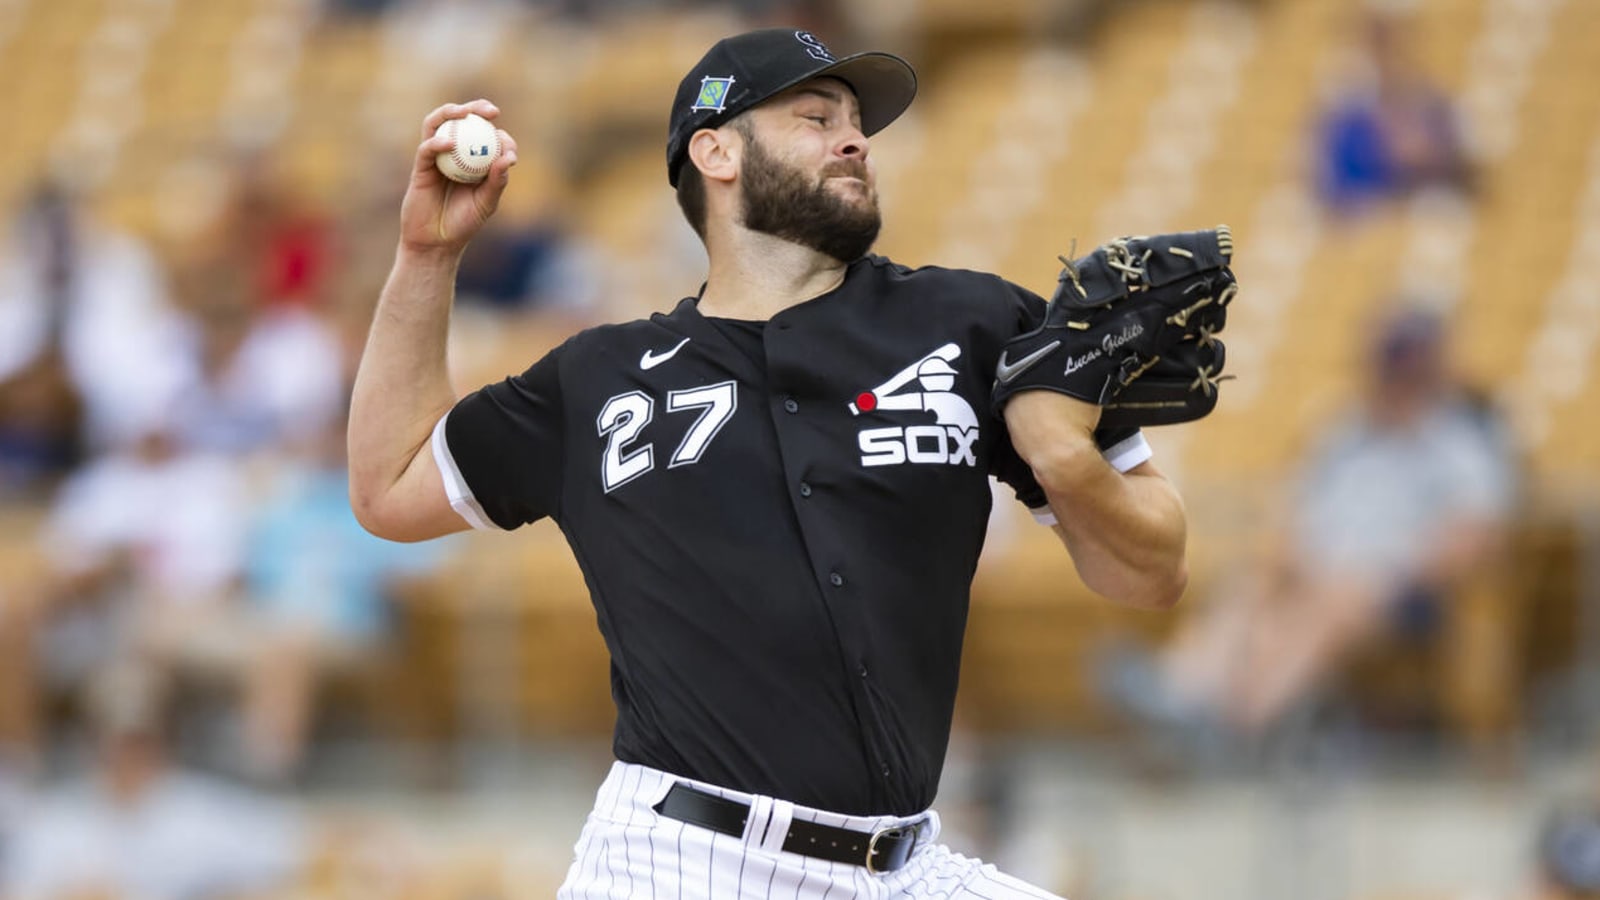 Lucas Giolito expected to return from injury Sunday